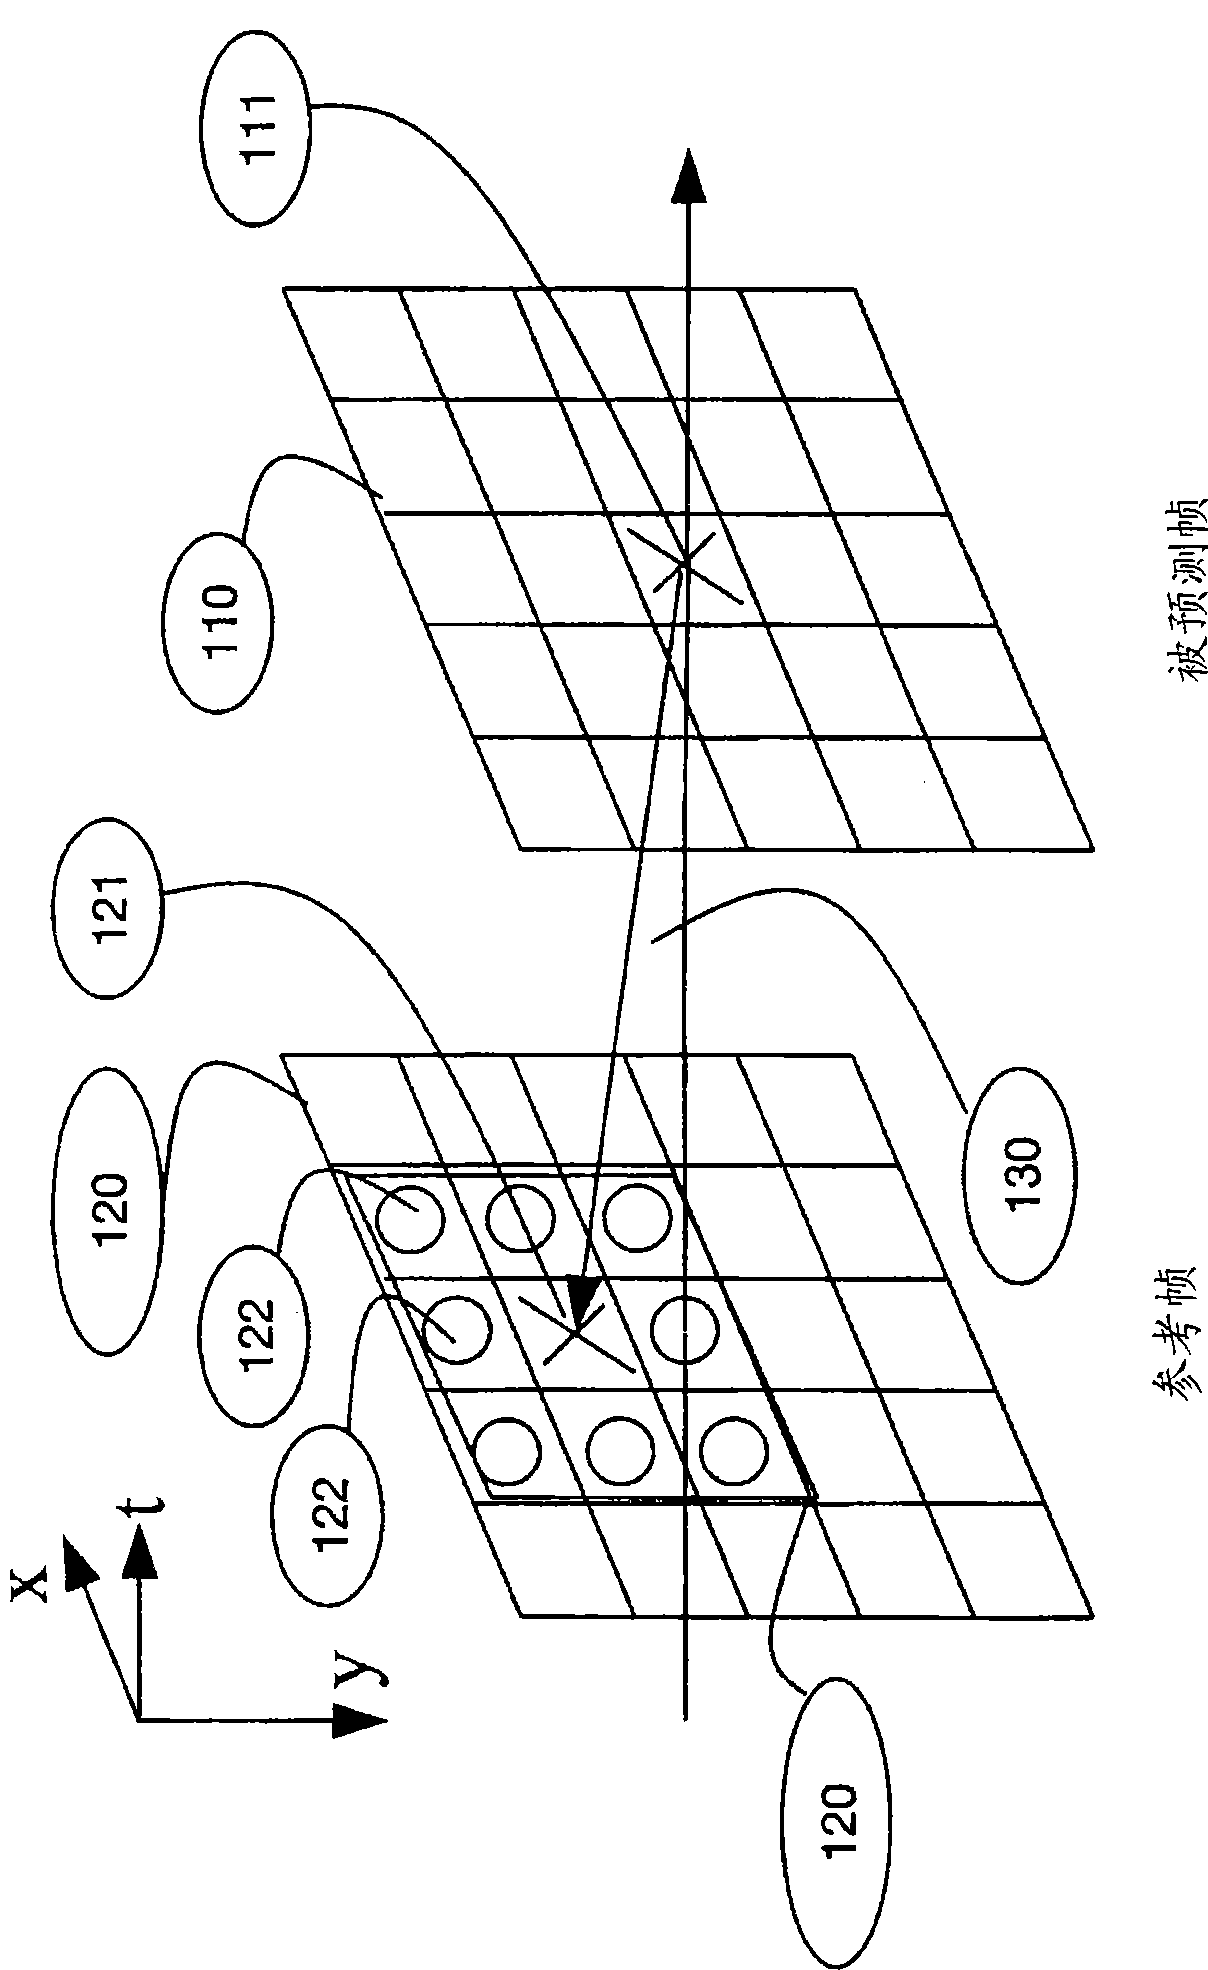 Image prediction method and system